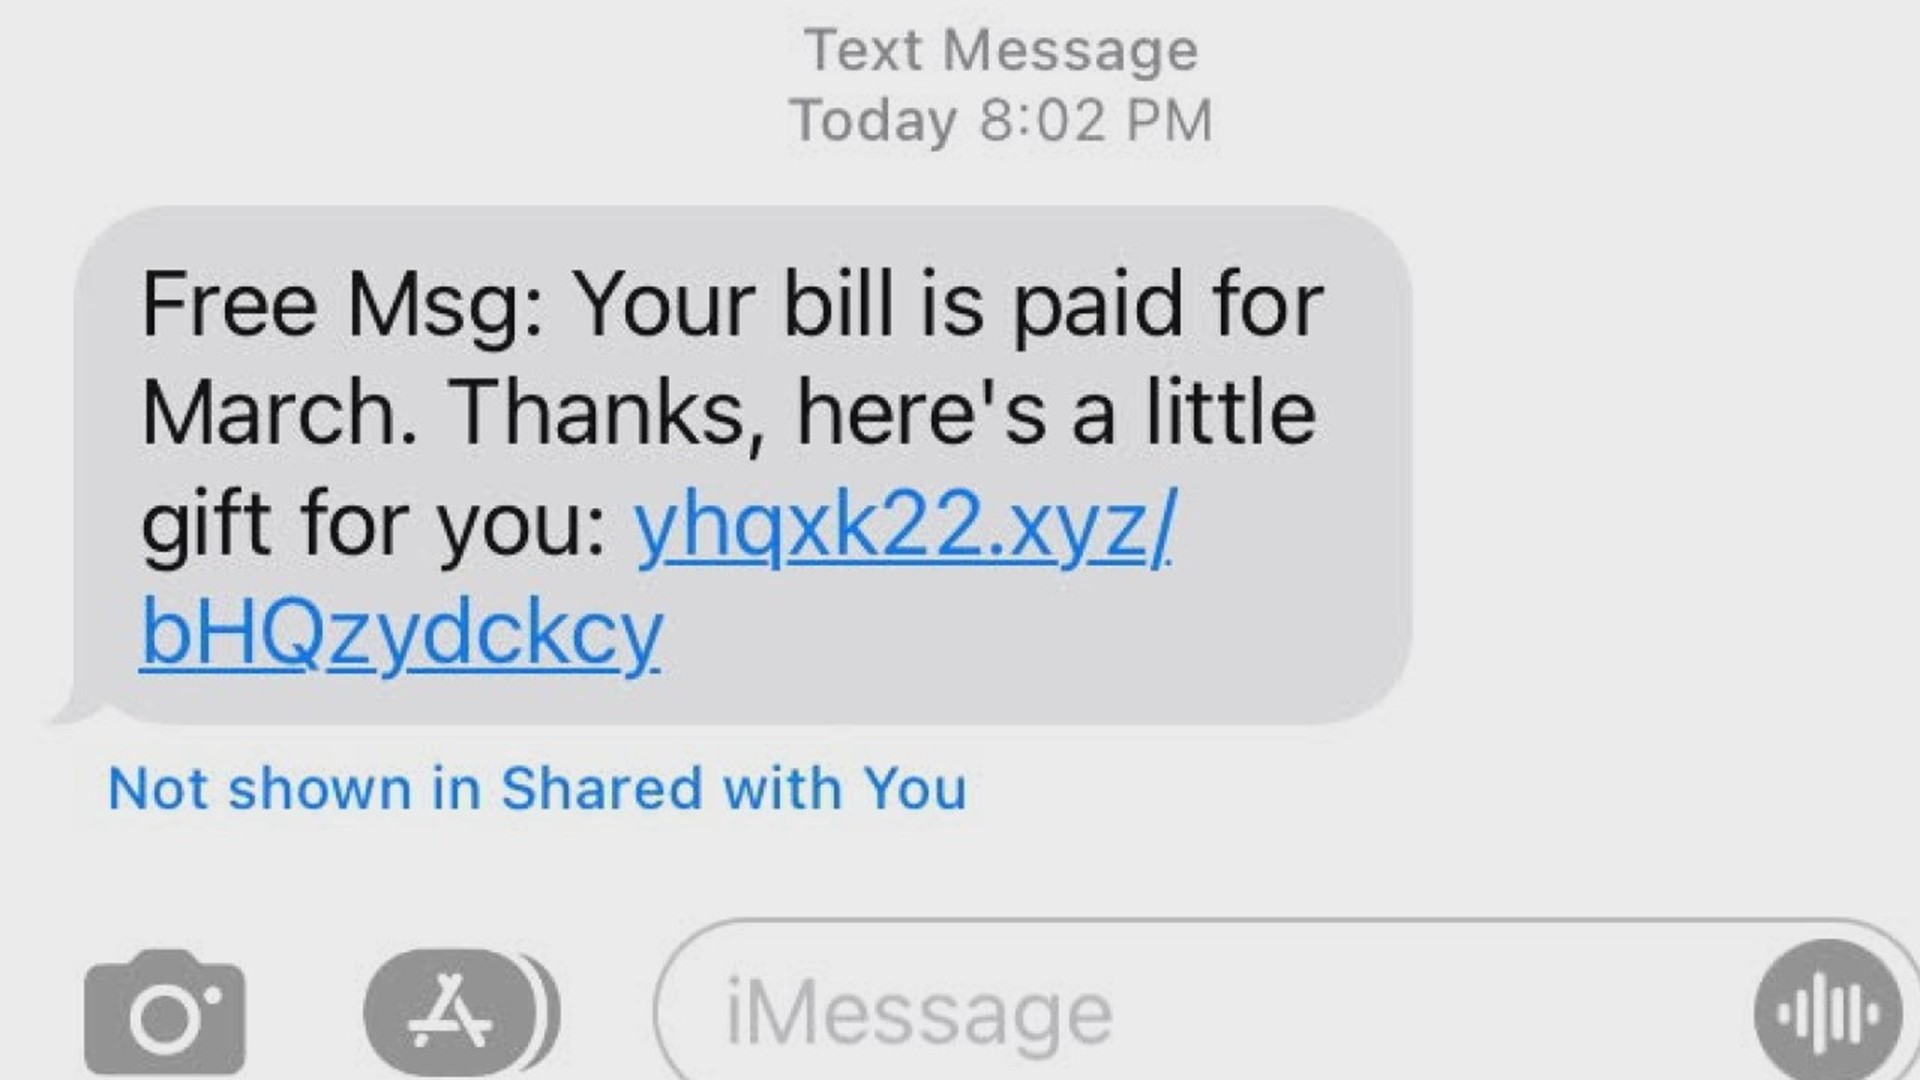 Verizon users are getting a text from their own phone number with a link to a "gift" that sends them to a Russian website.